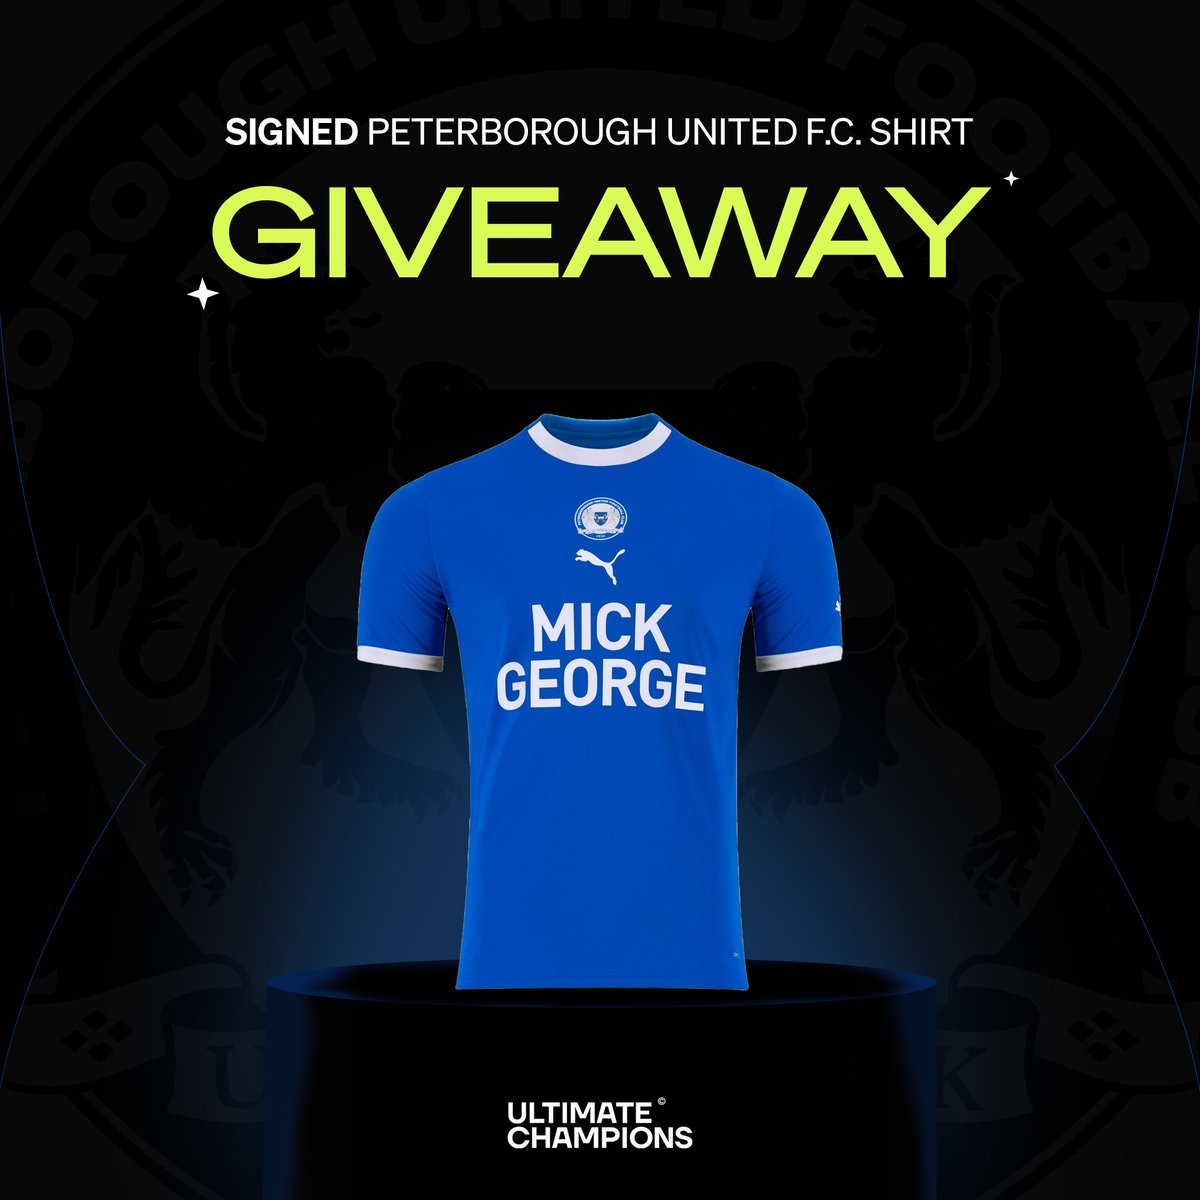 🚨 Peterborough Giveaway Alert! 🚨

🏆 As @theposh battle through the League One Playoffs, we're offering a chance to win a Signed Shirt!

Follow these steps to enter the giveaway:

1⃣ Like
2⃣ RT
3⃣ Follow @UltiChampsBball & @UltiChampsBball
4⃣ Tag two friends & comment your